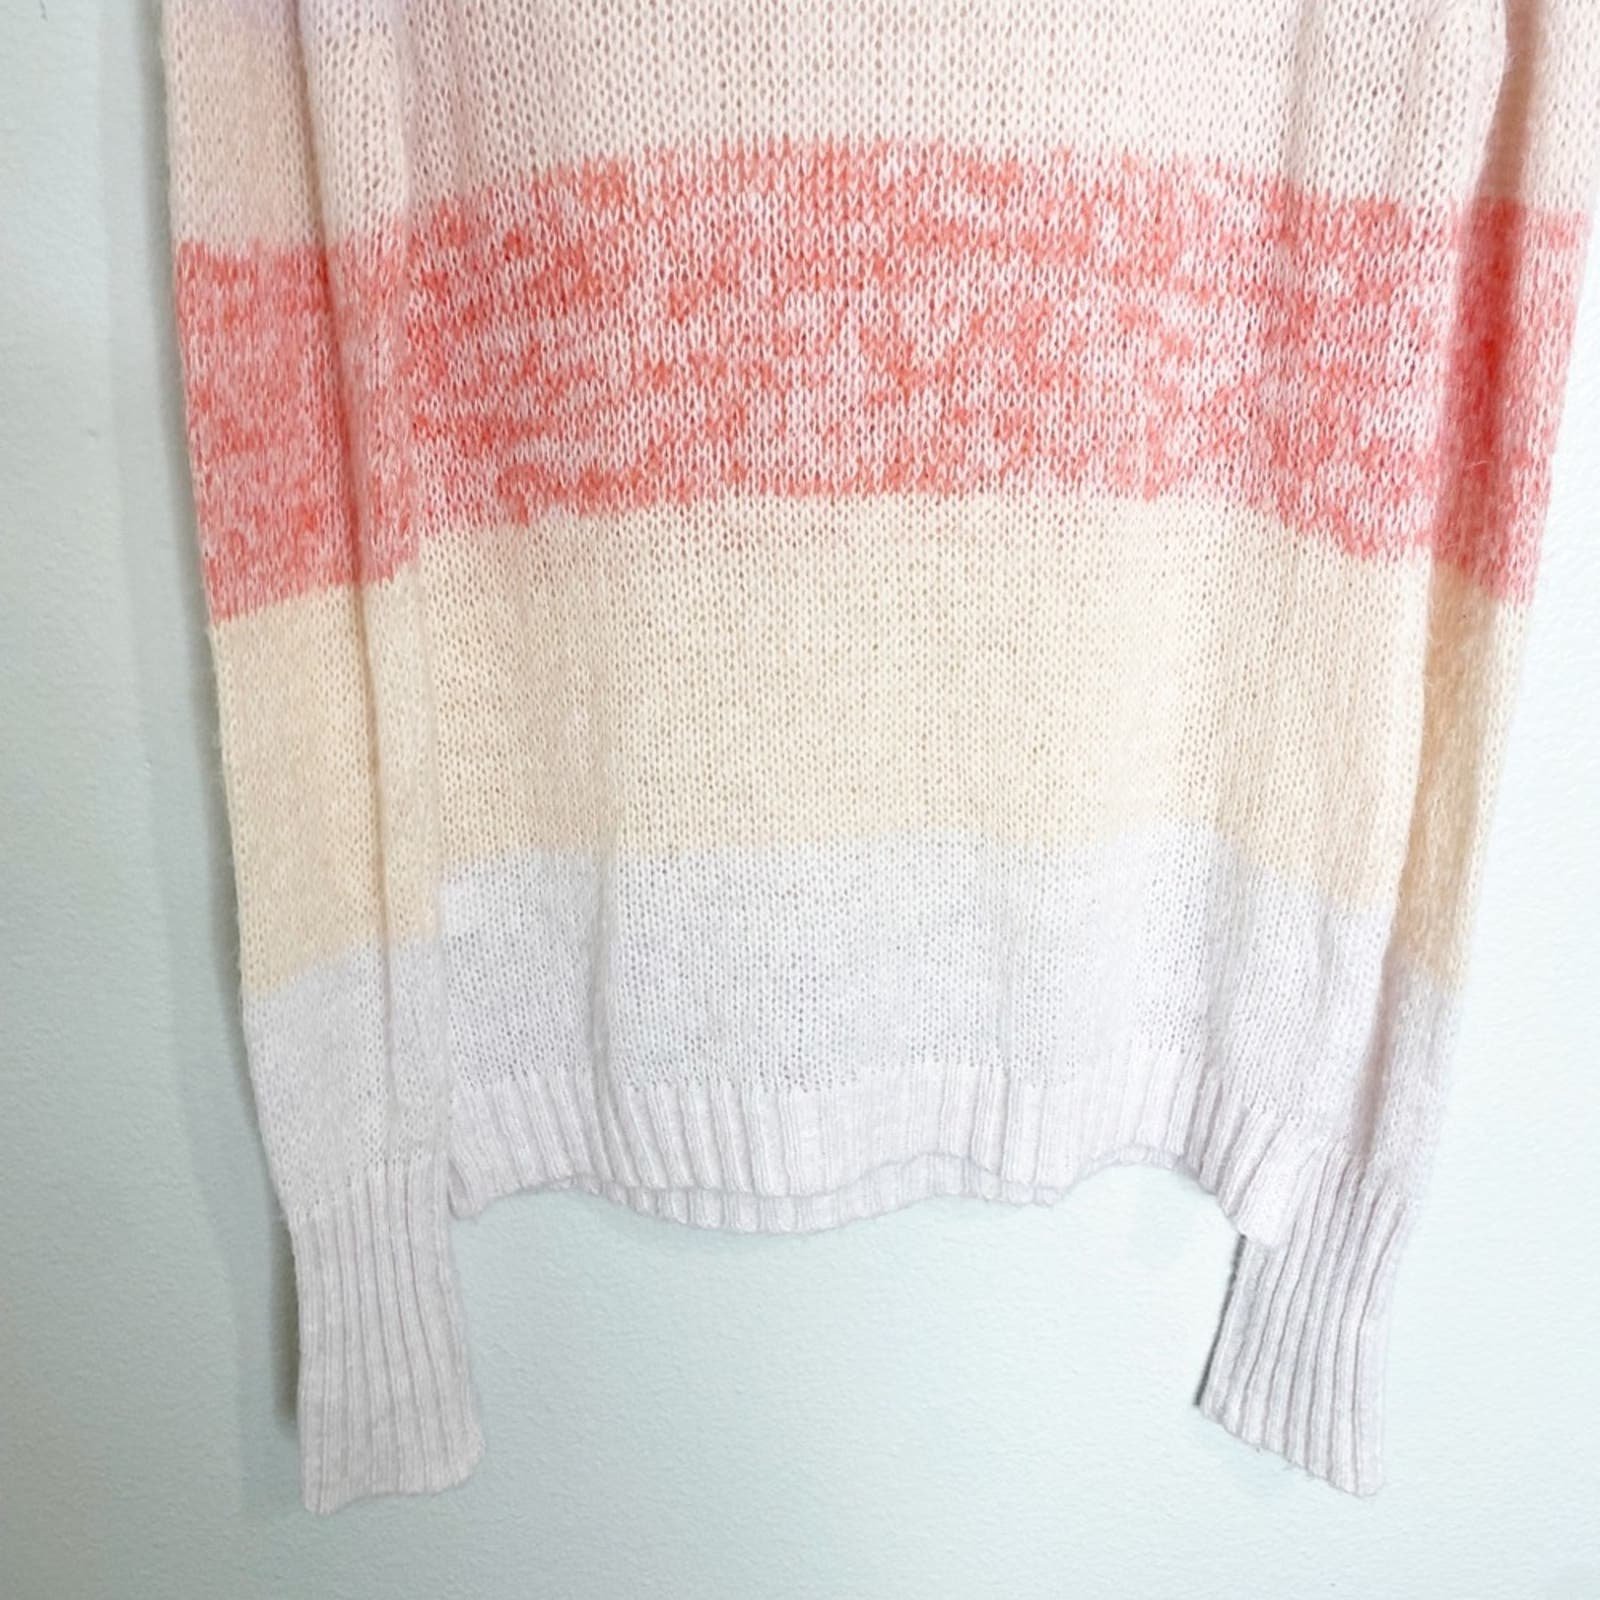 Factory Direct  wildfox white label knit turtleneck sweater size large n99w6K0rh US Outlet